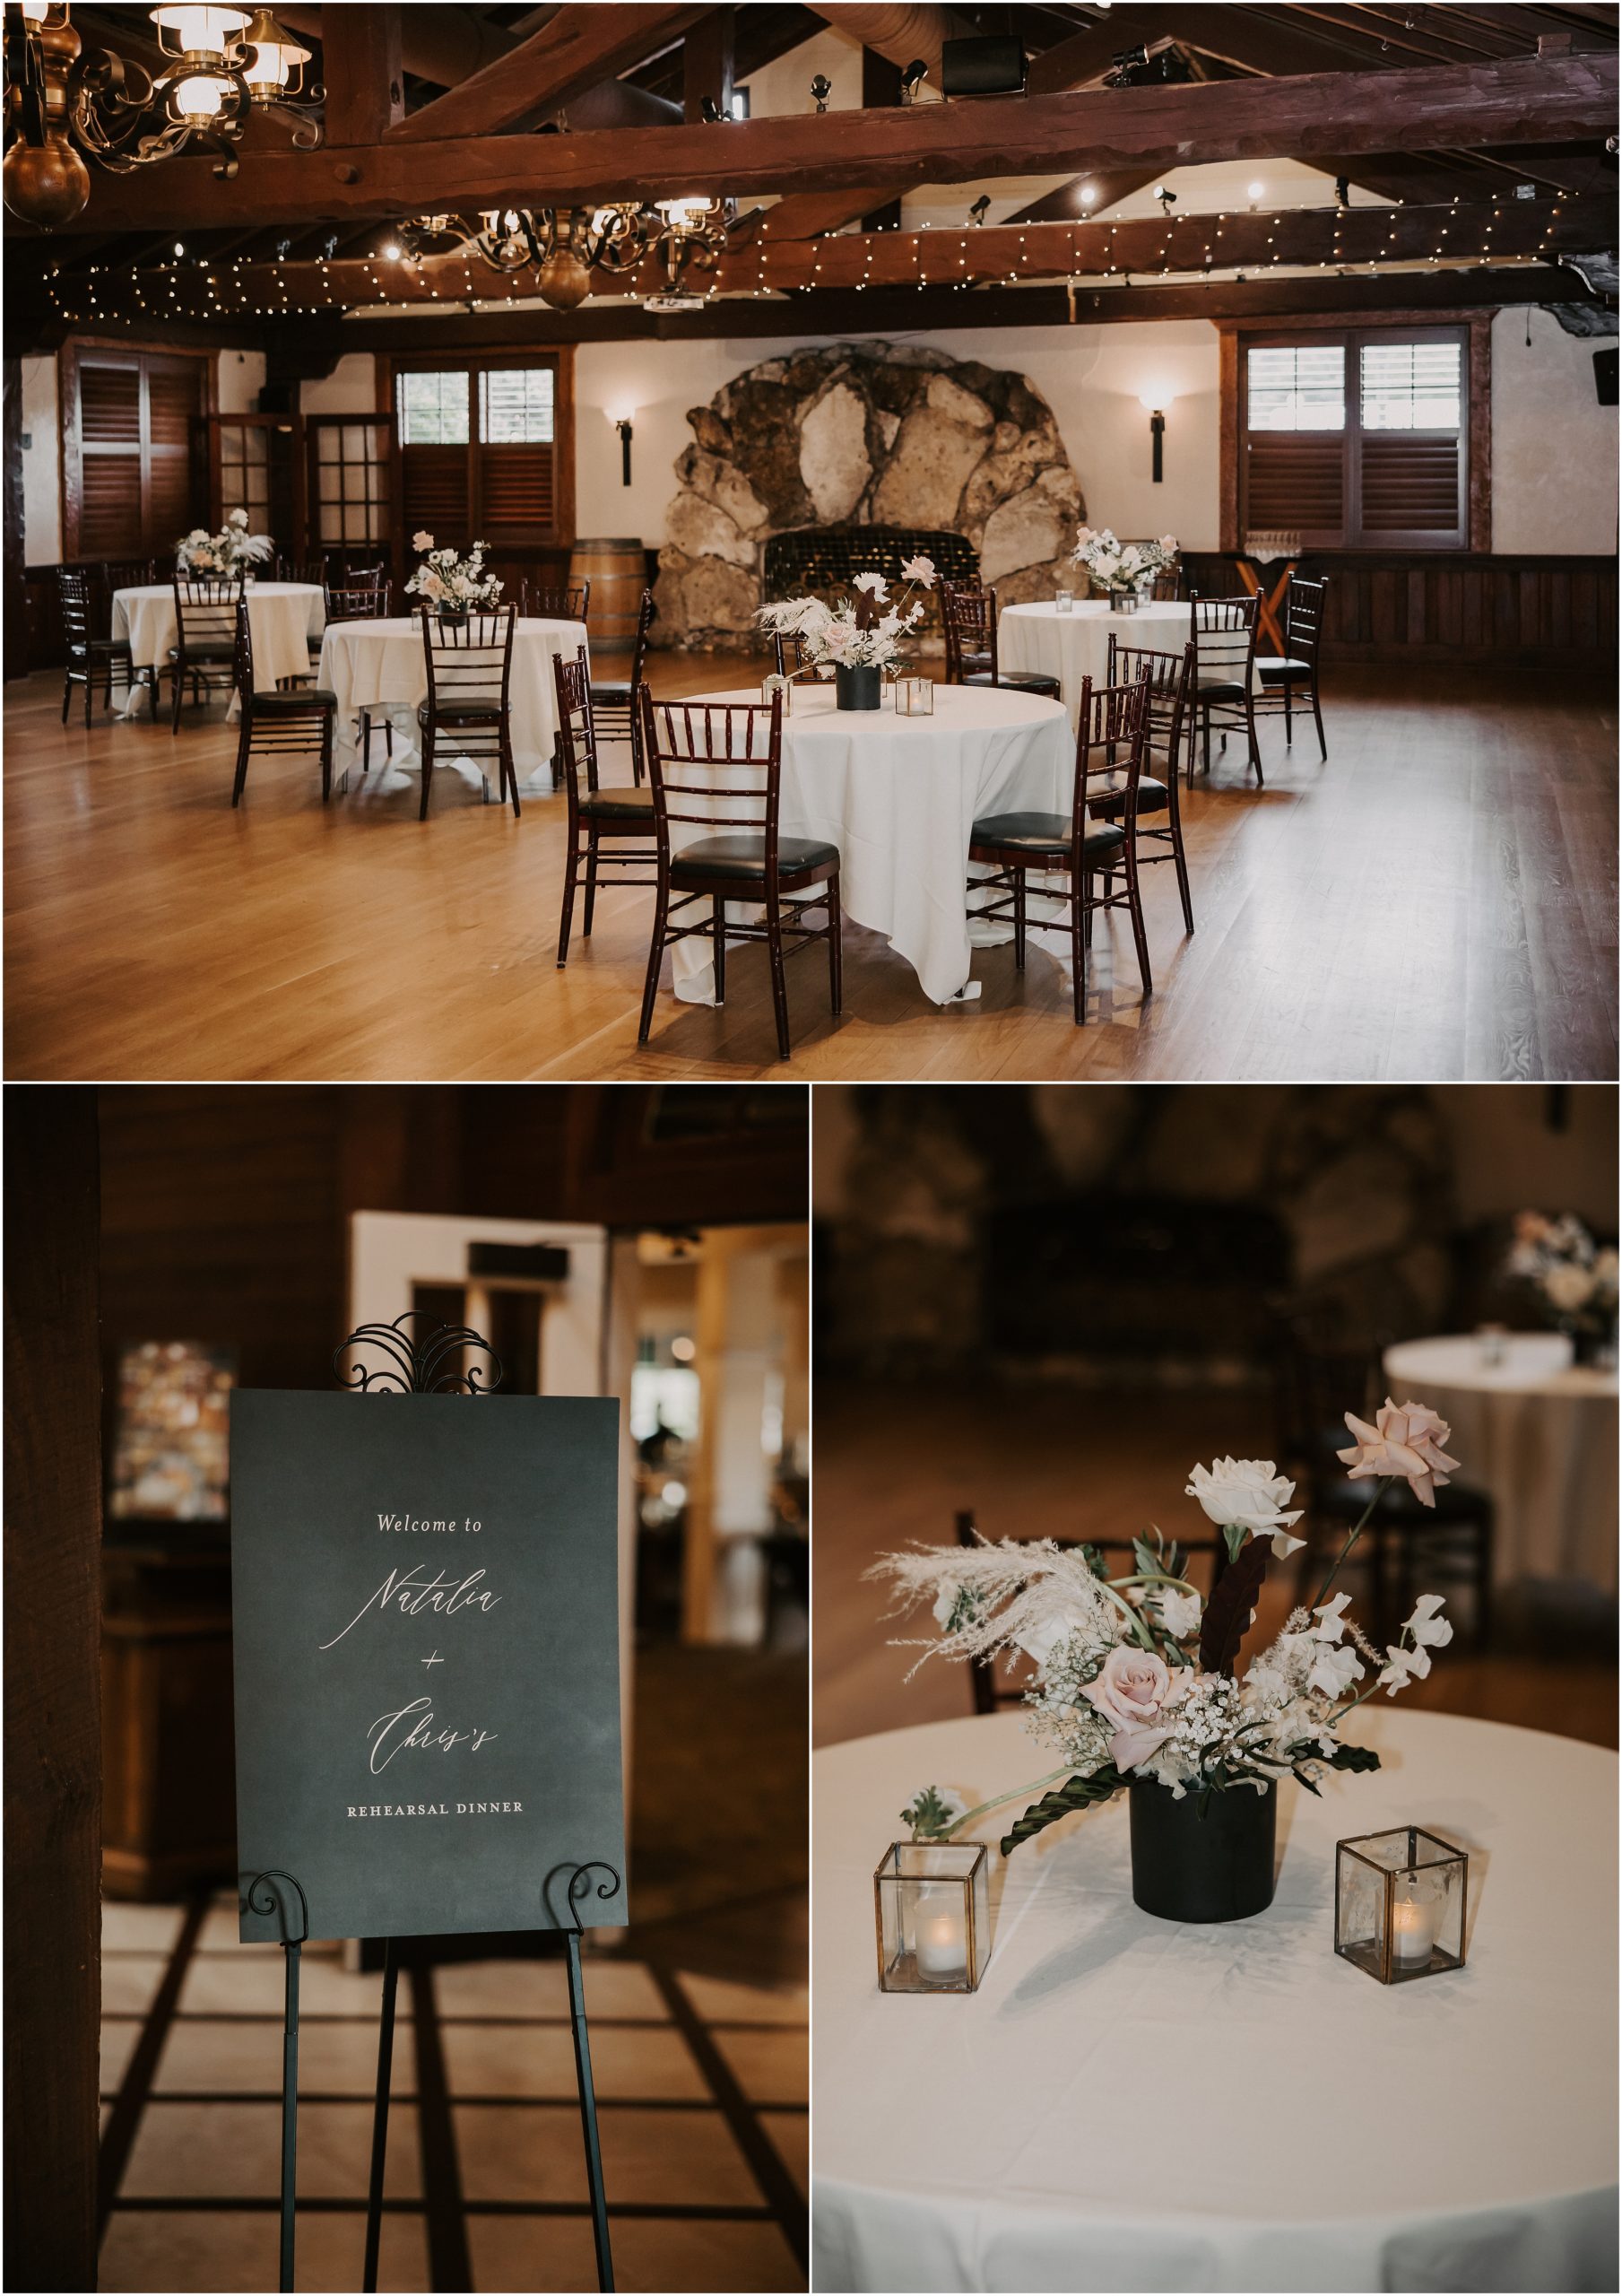 to begin with the distinguished garden wedding weekend celebrations, they held their rehearsal dinner at Dubsdread Golf club, given their guest a little sneak peek of what awaited them over this special weekend! The welcome sign and wedding's stationary were from Minted Weddings.